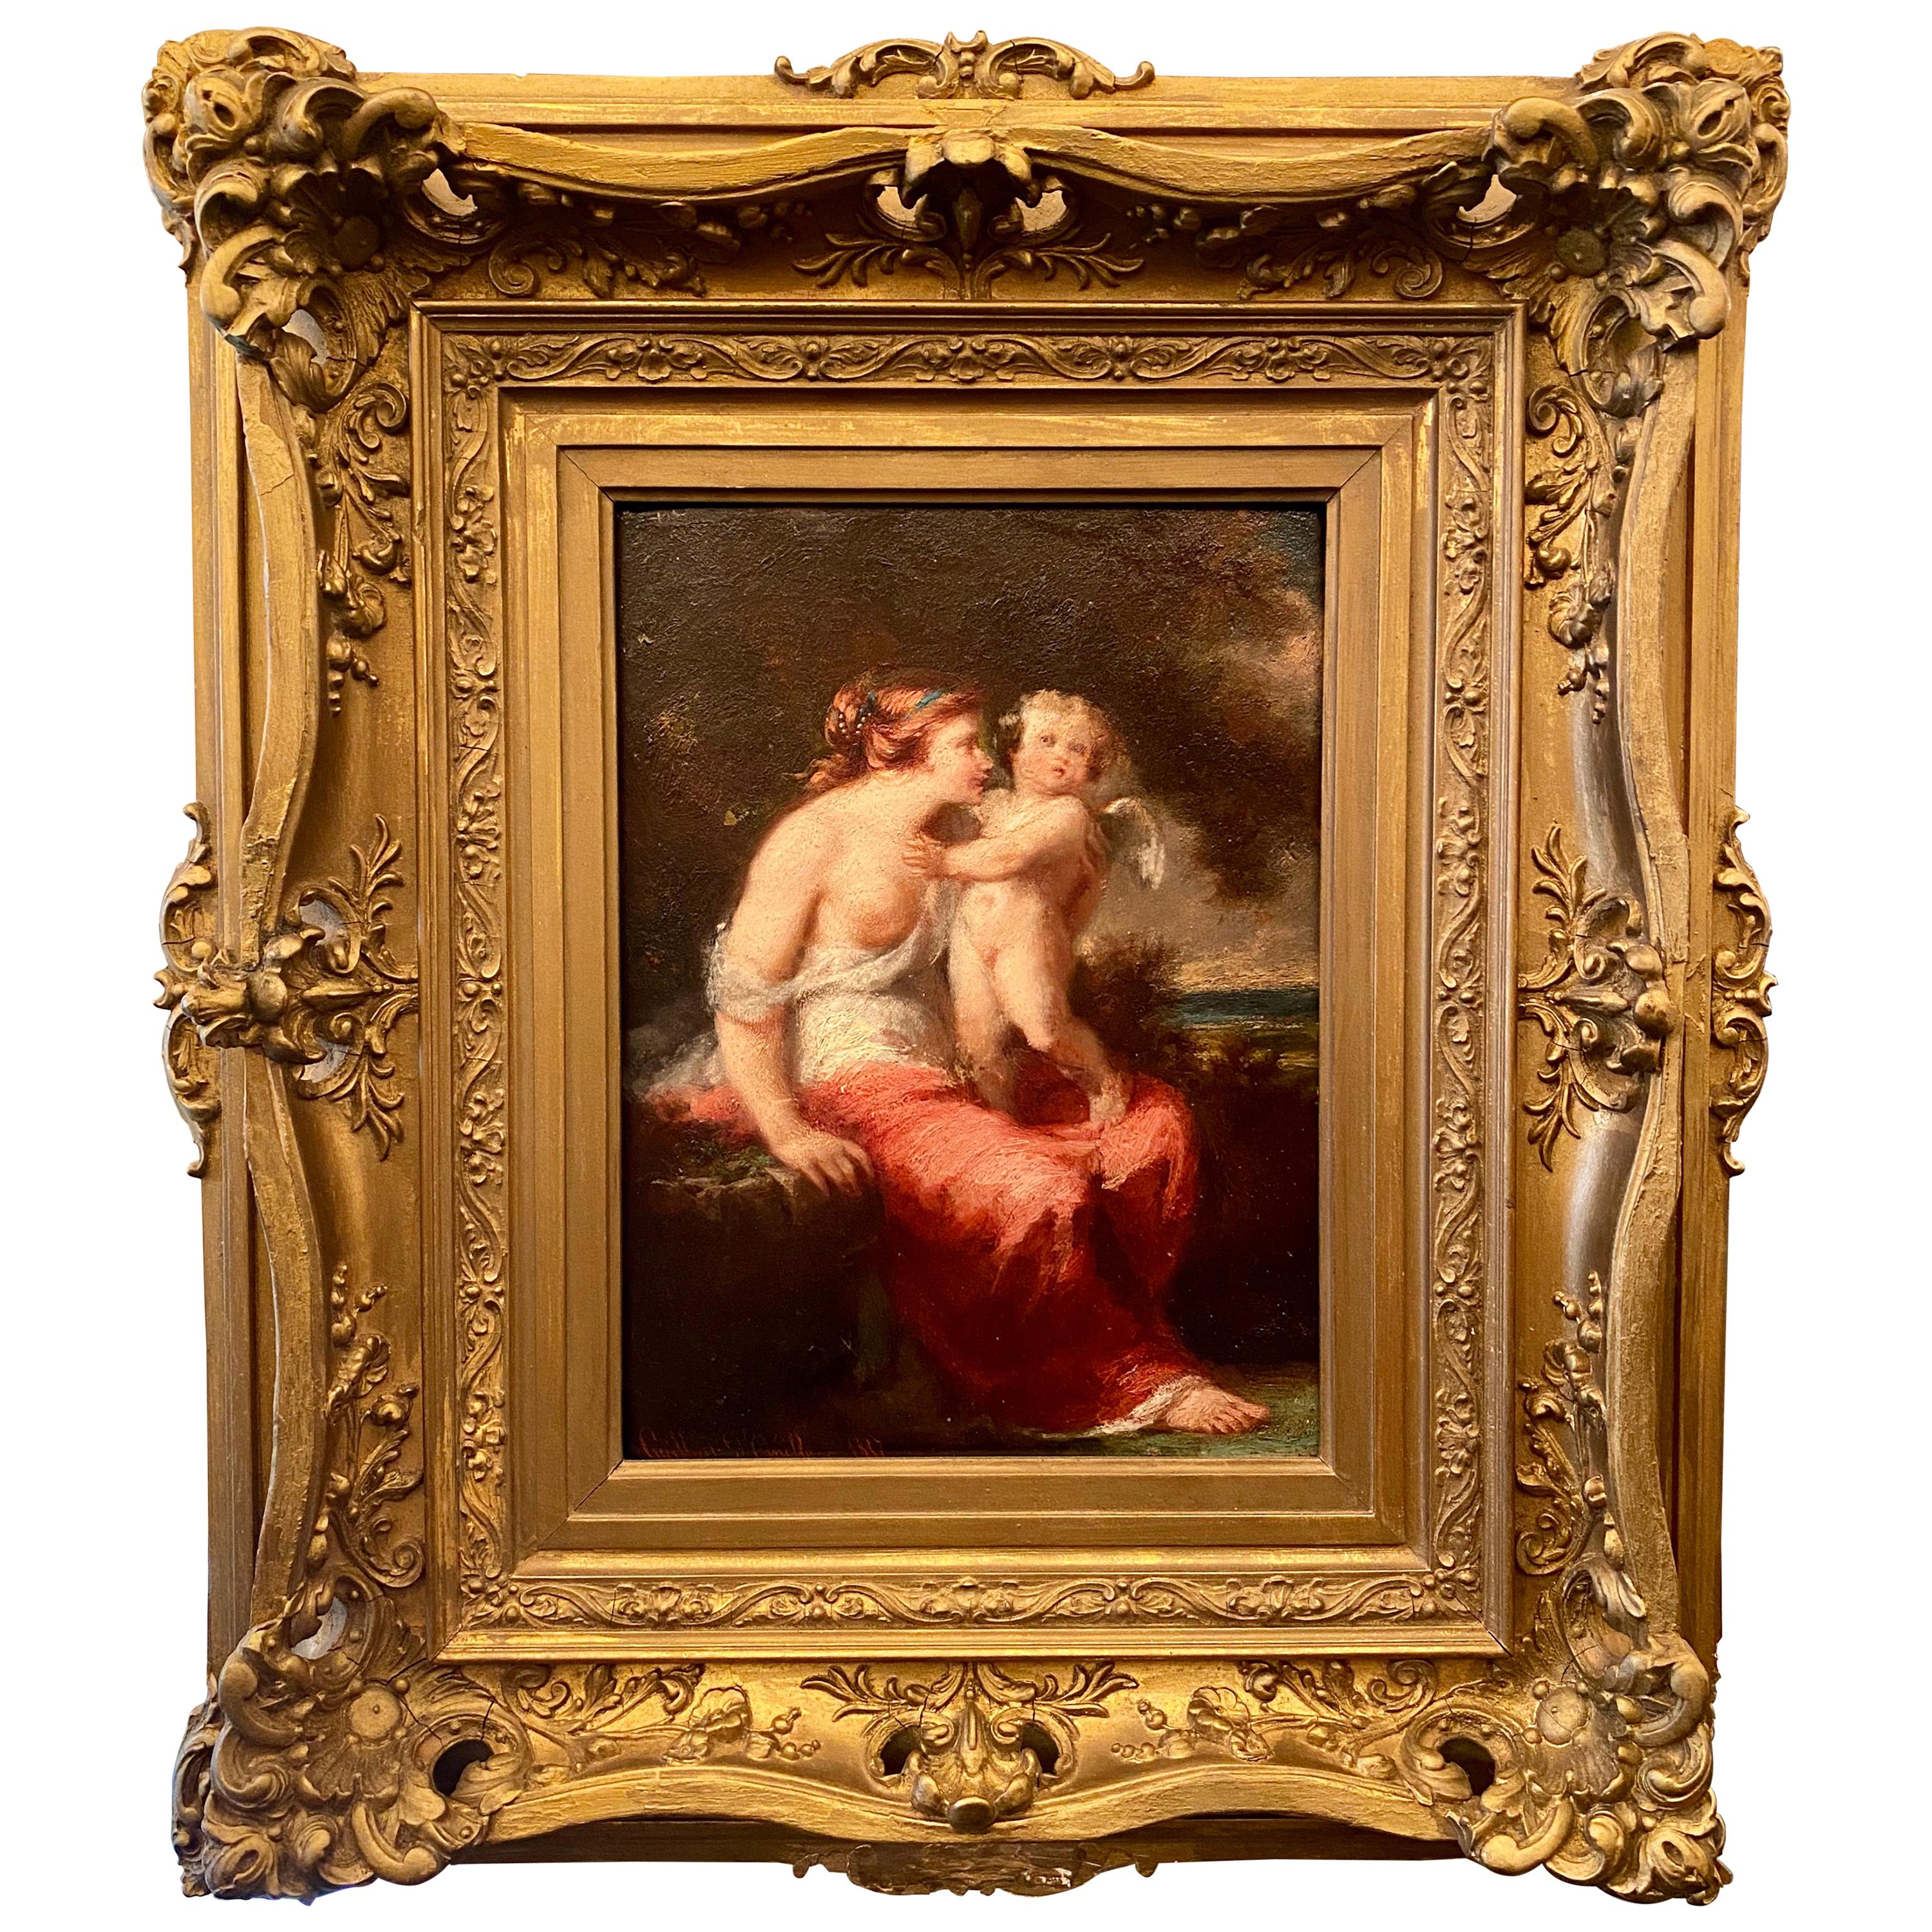 Antique Nude Woman and Cherub Oil Painting on Canvas, Original Frame, circa 1880